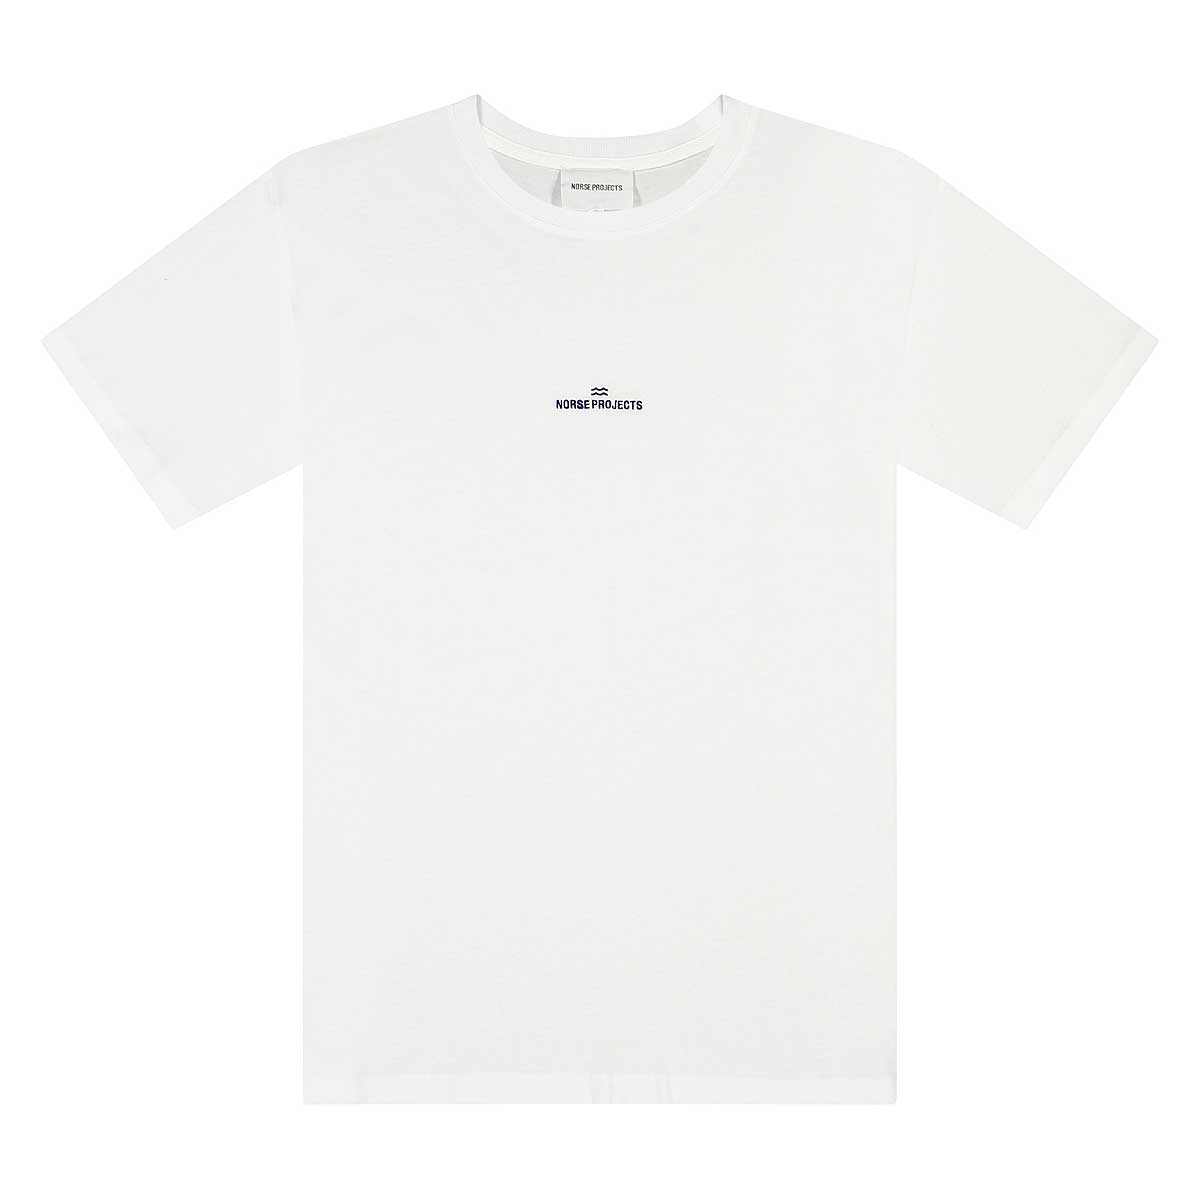 Buy Niels Norse Projects Wave Logo T-Shirt for N/A 0.0 on KICKZ.com!